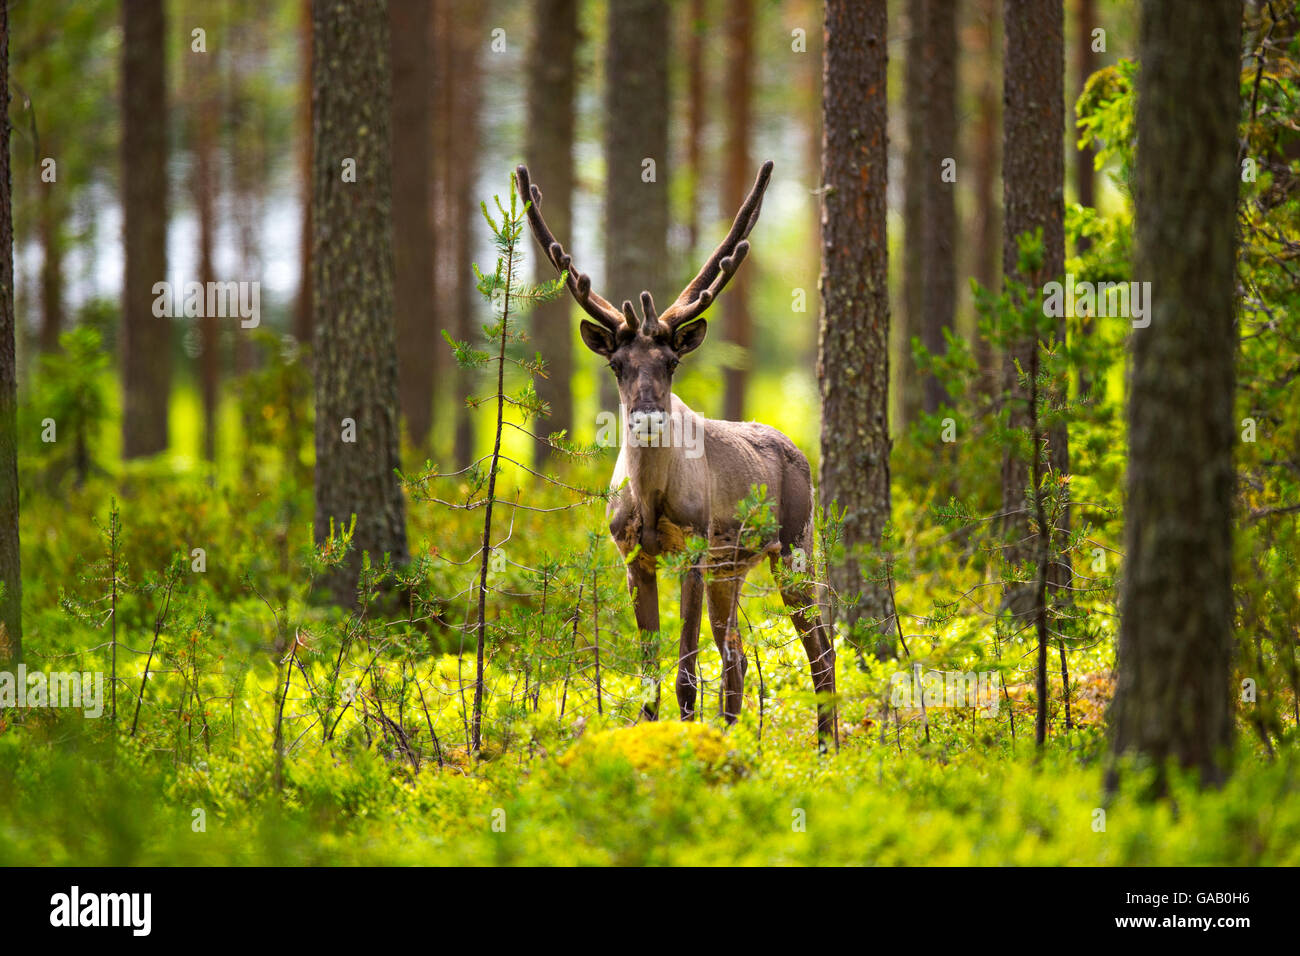 Forest reindeer, (Rangifer tarandus fennicus) Viiksimo, Kuhmo region. Finland, July. Rare subspecies which were nearly extinct in the 19th Century. Stock Photo